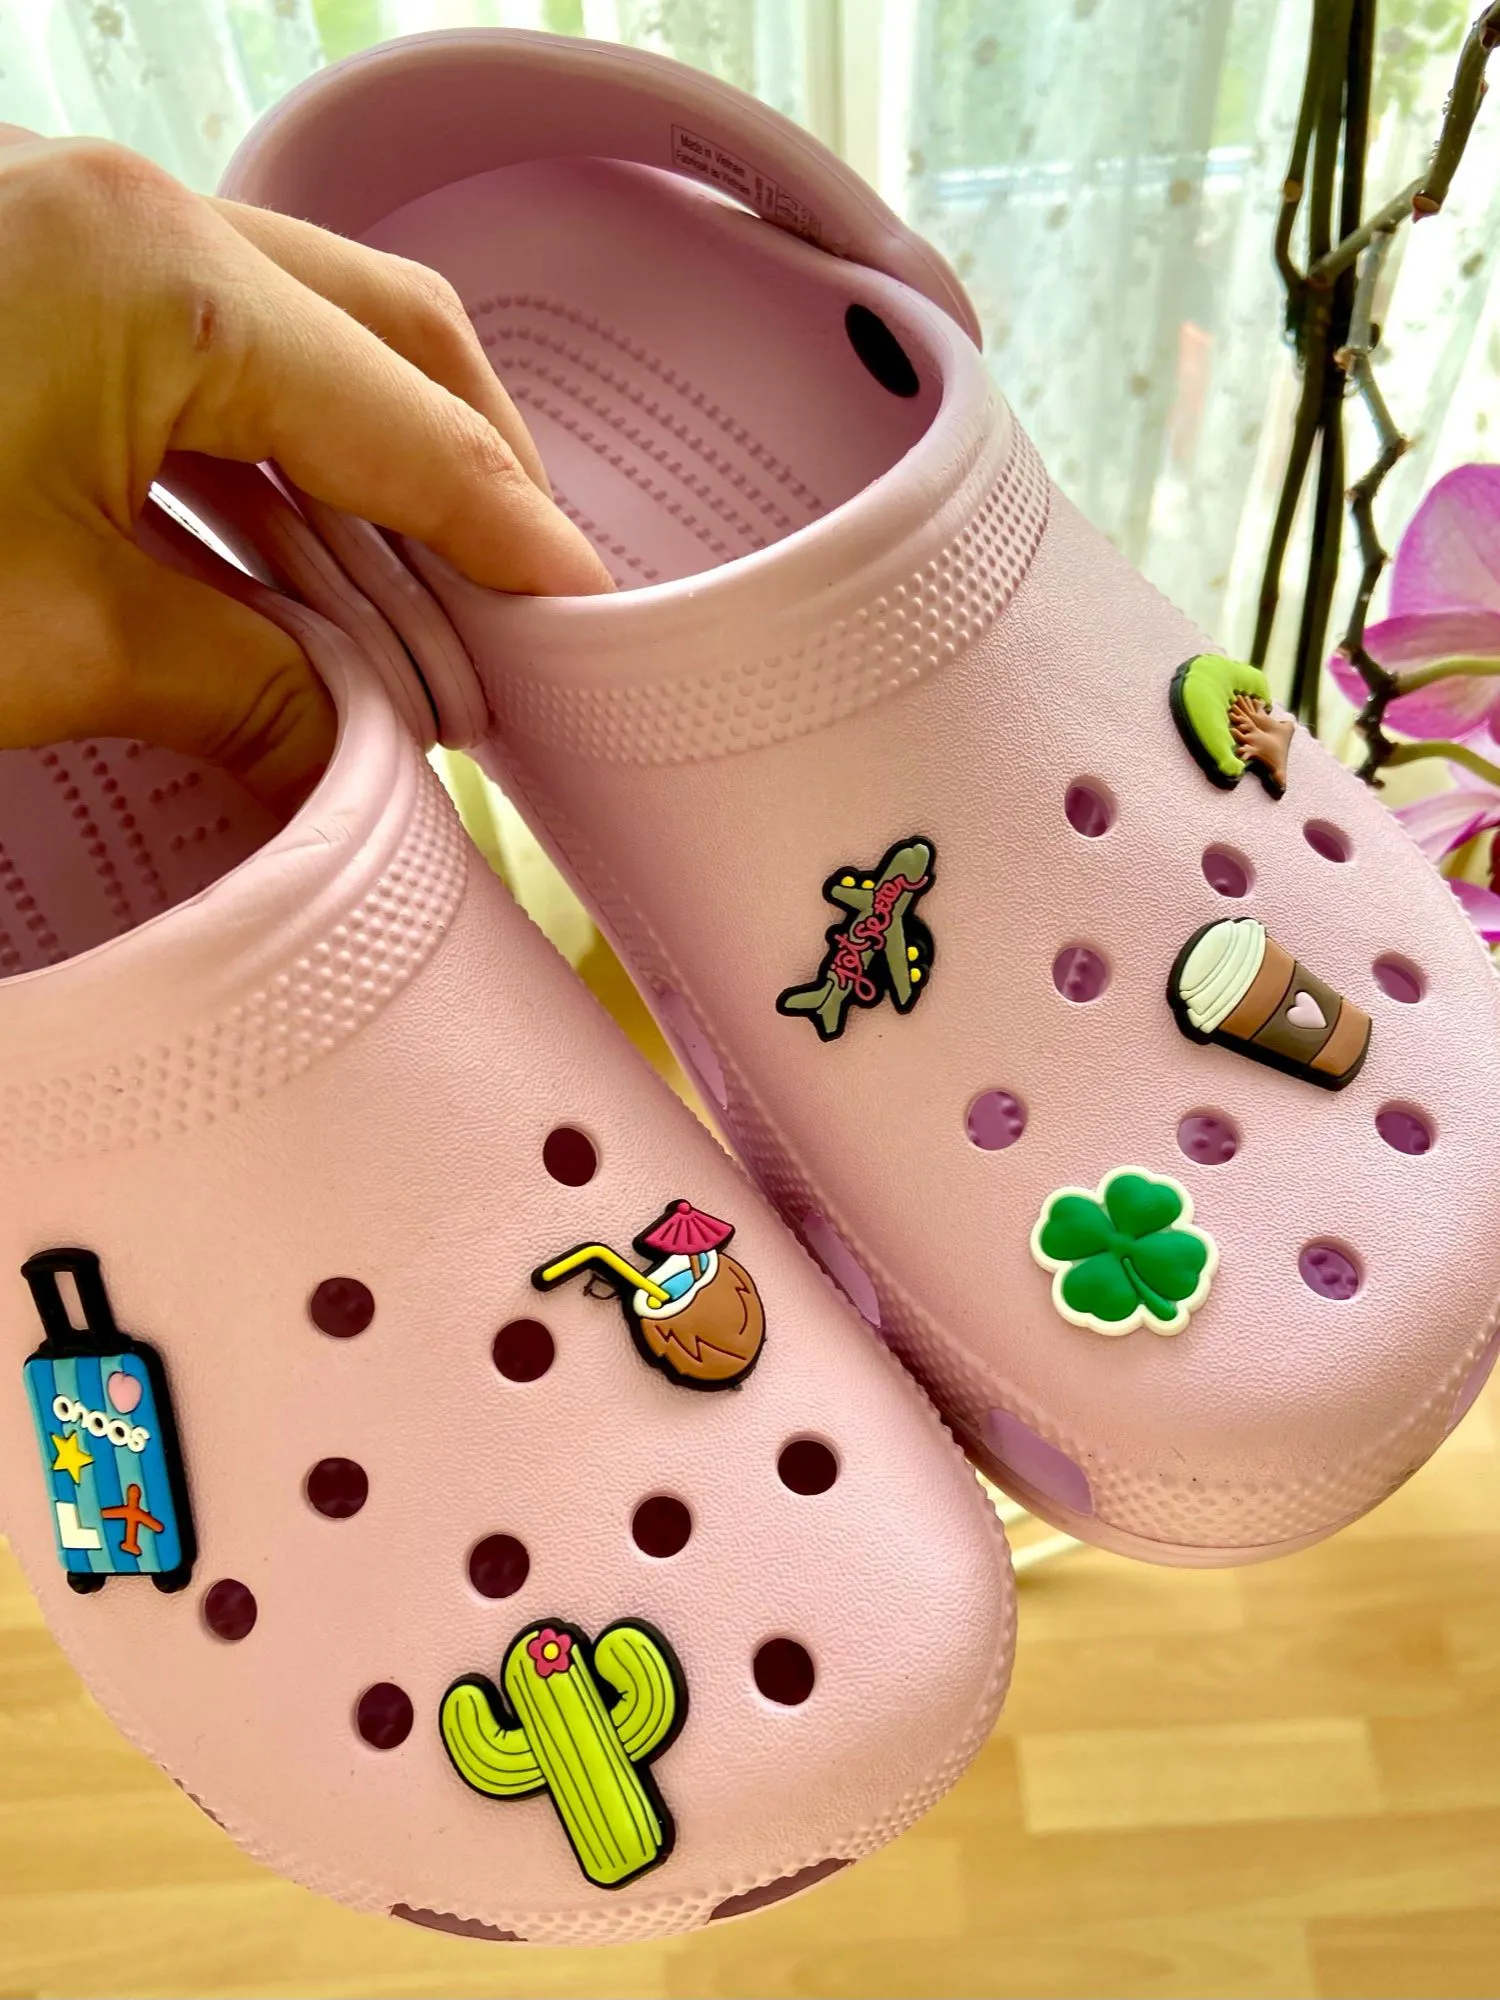 fairy tales shoes charms clog jeans magic shoes decoration buckle animals garden sandals accessories kids gifts wholesale